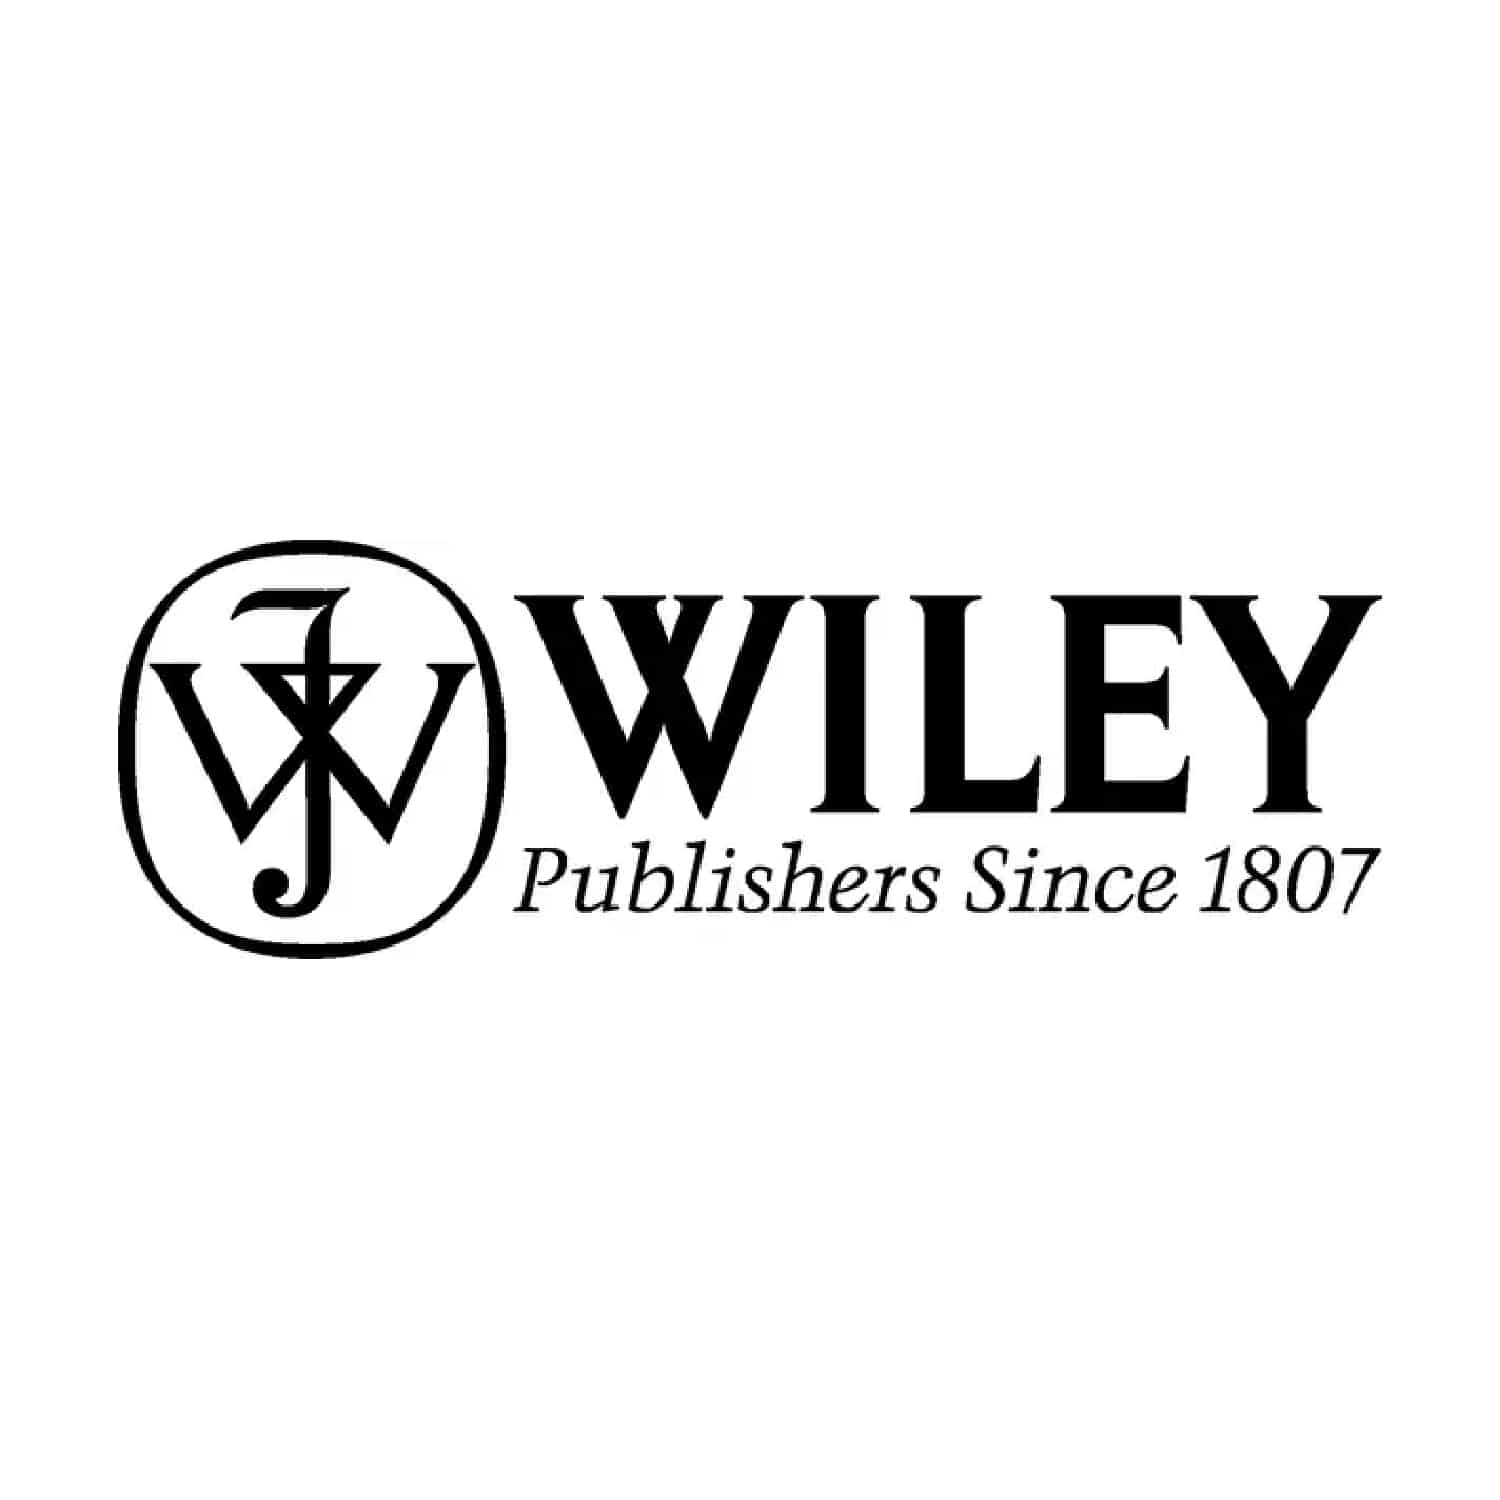 John Wiley and Sons Ltd